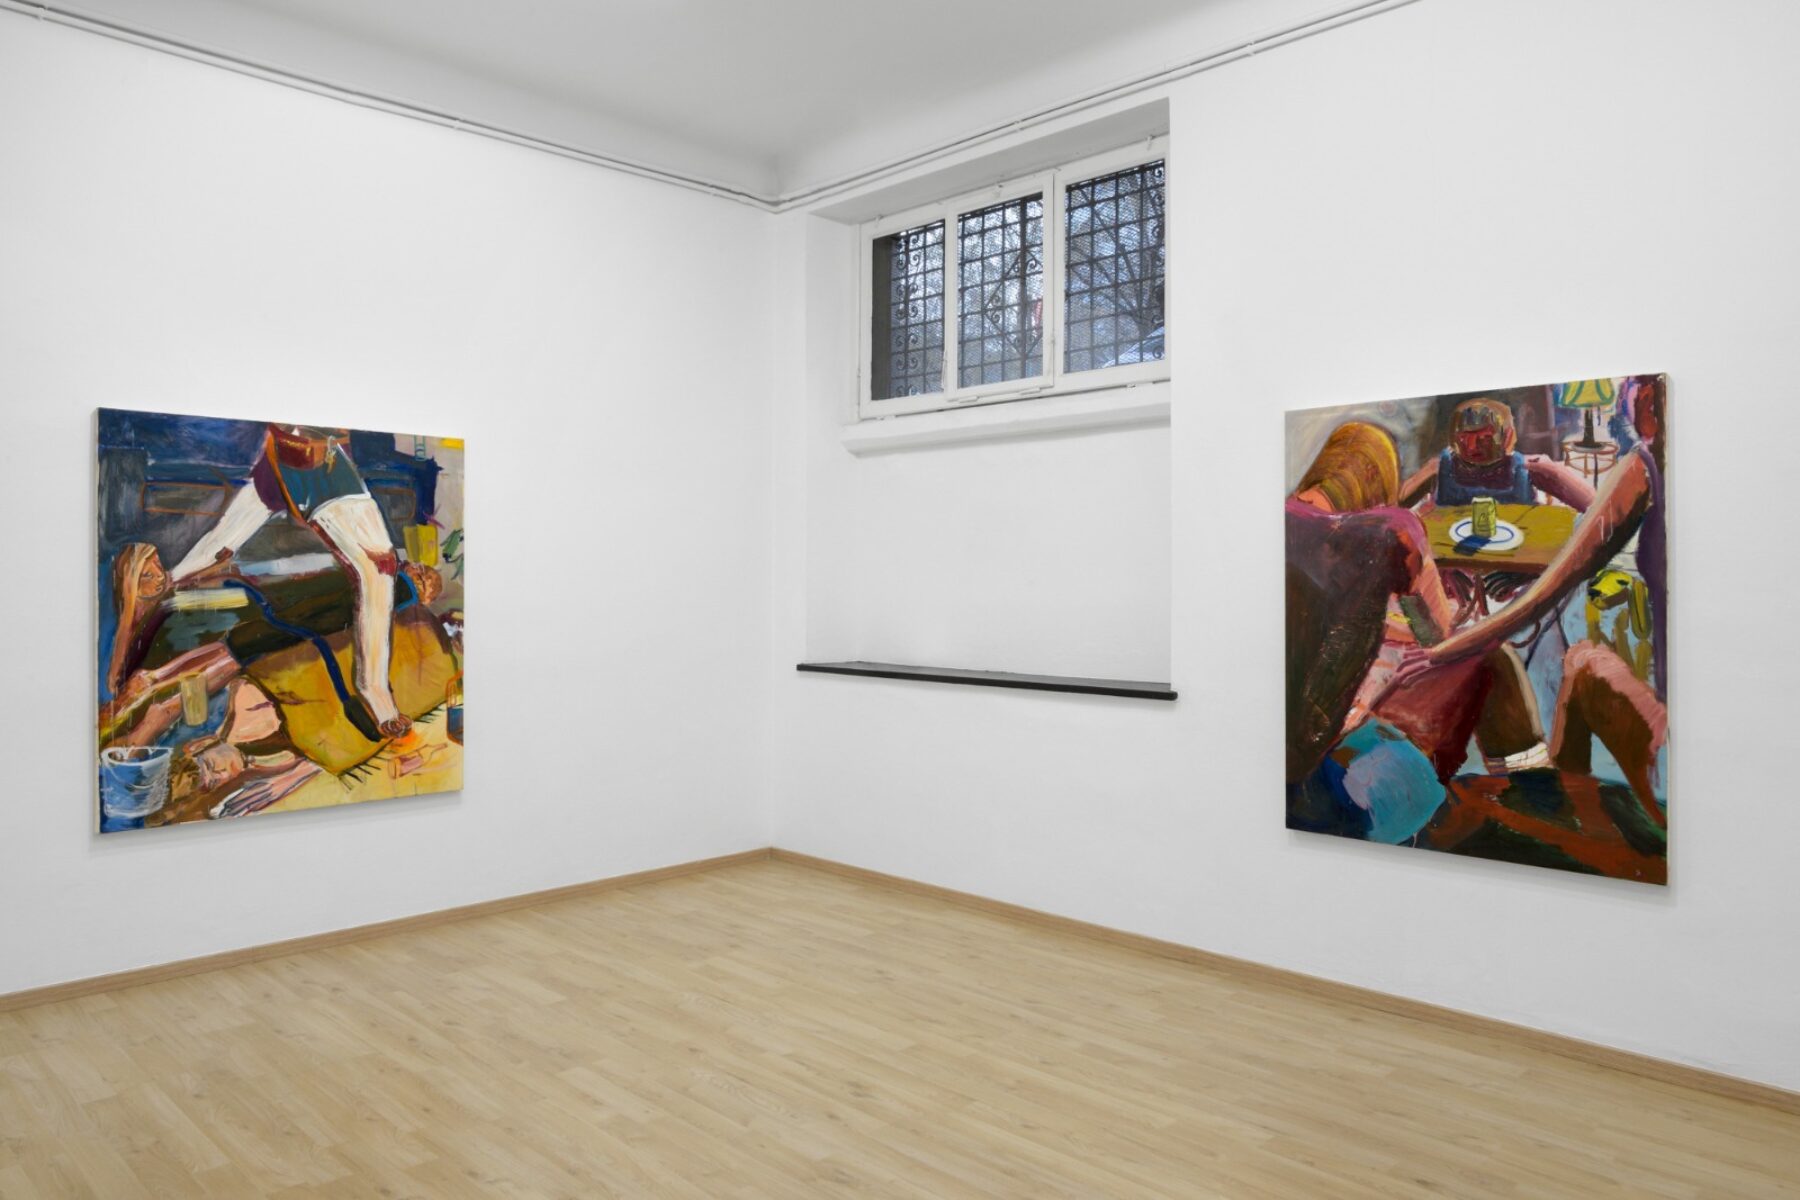 Jacob Patrick Brooks, Panic Room, installation view, A.More Gallery, Milano